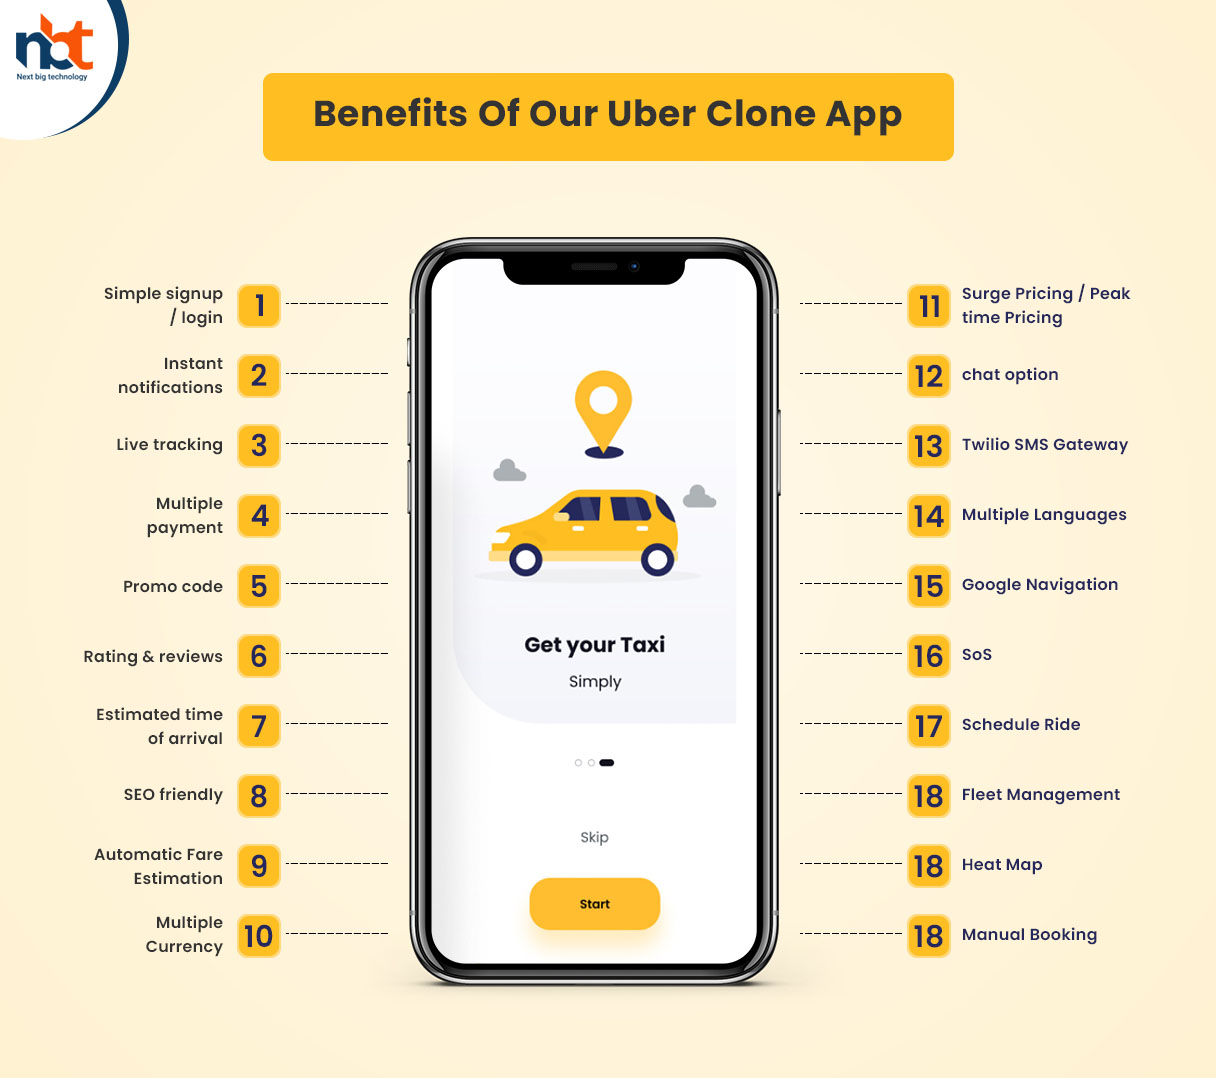 Benefits Of Our Uber Clone App